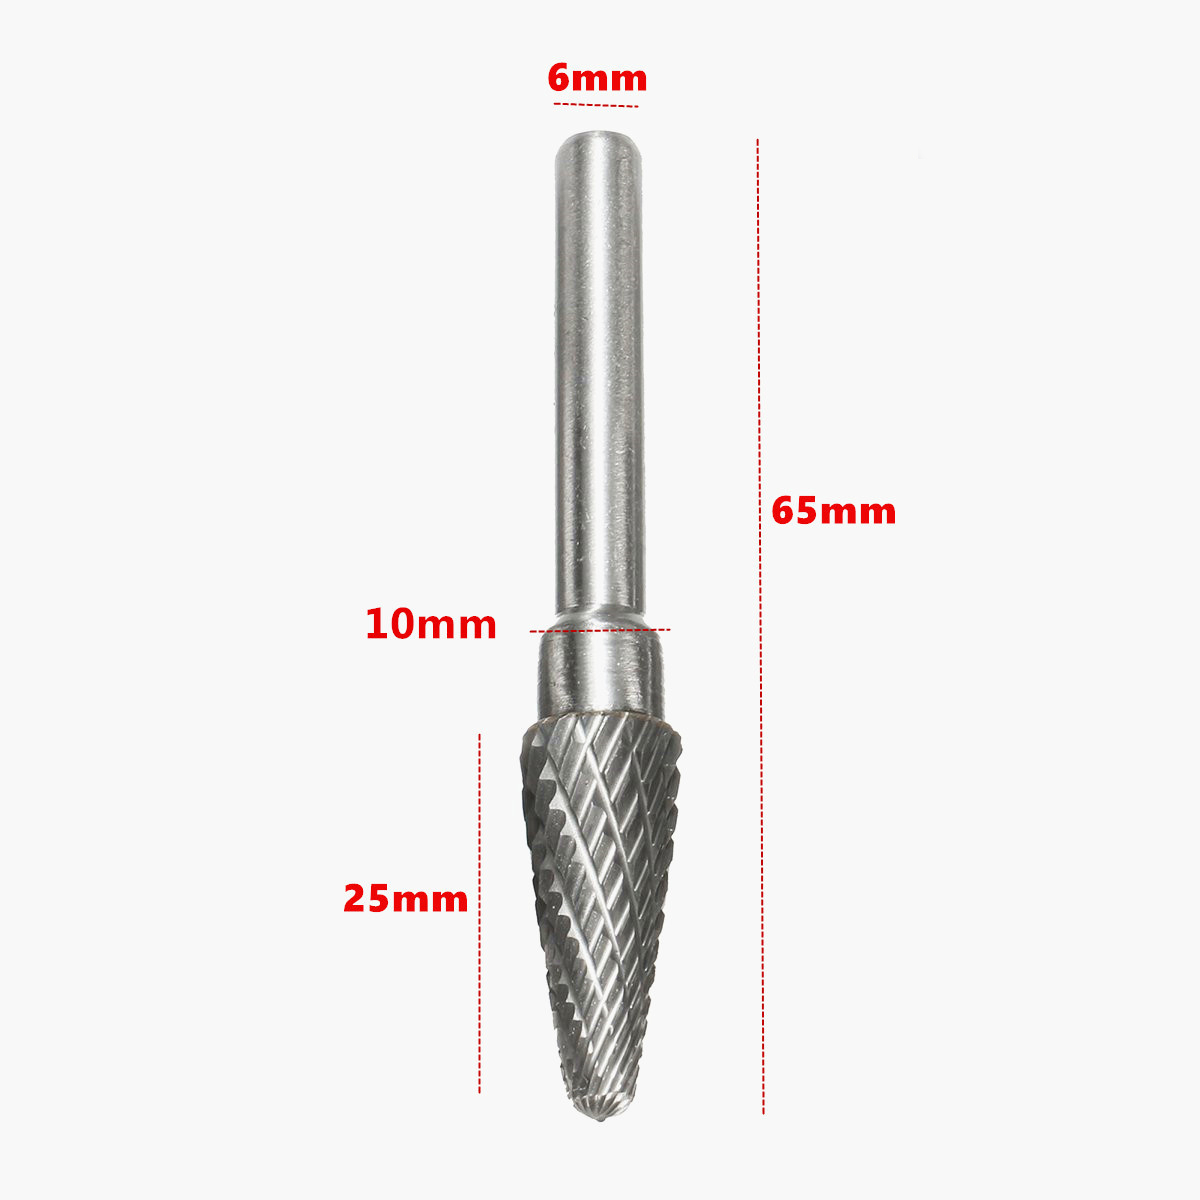 Drillpro-RB29-5pcs-6mm-Shank-Tungsten-Carbide-Burr-Rotary-Cutter-file-Set-Engraving-Tool-1029284-8